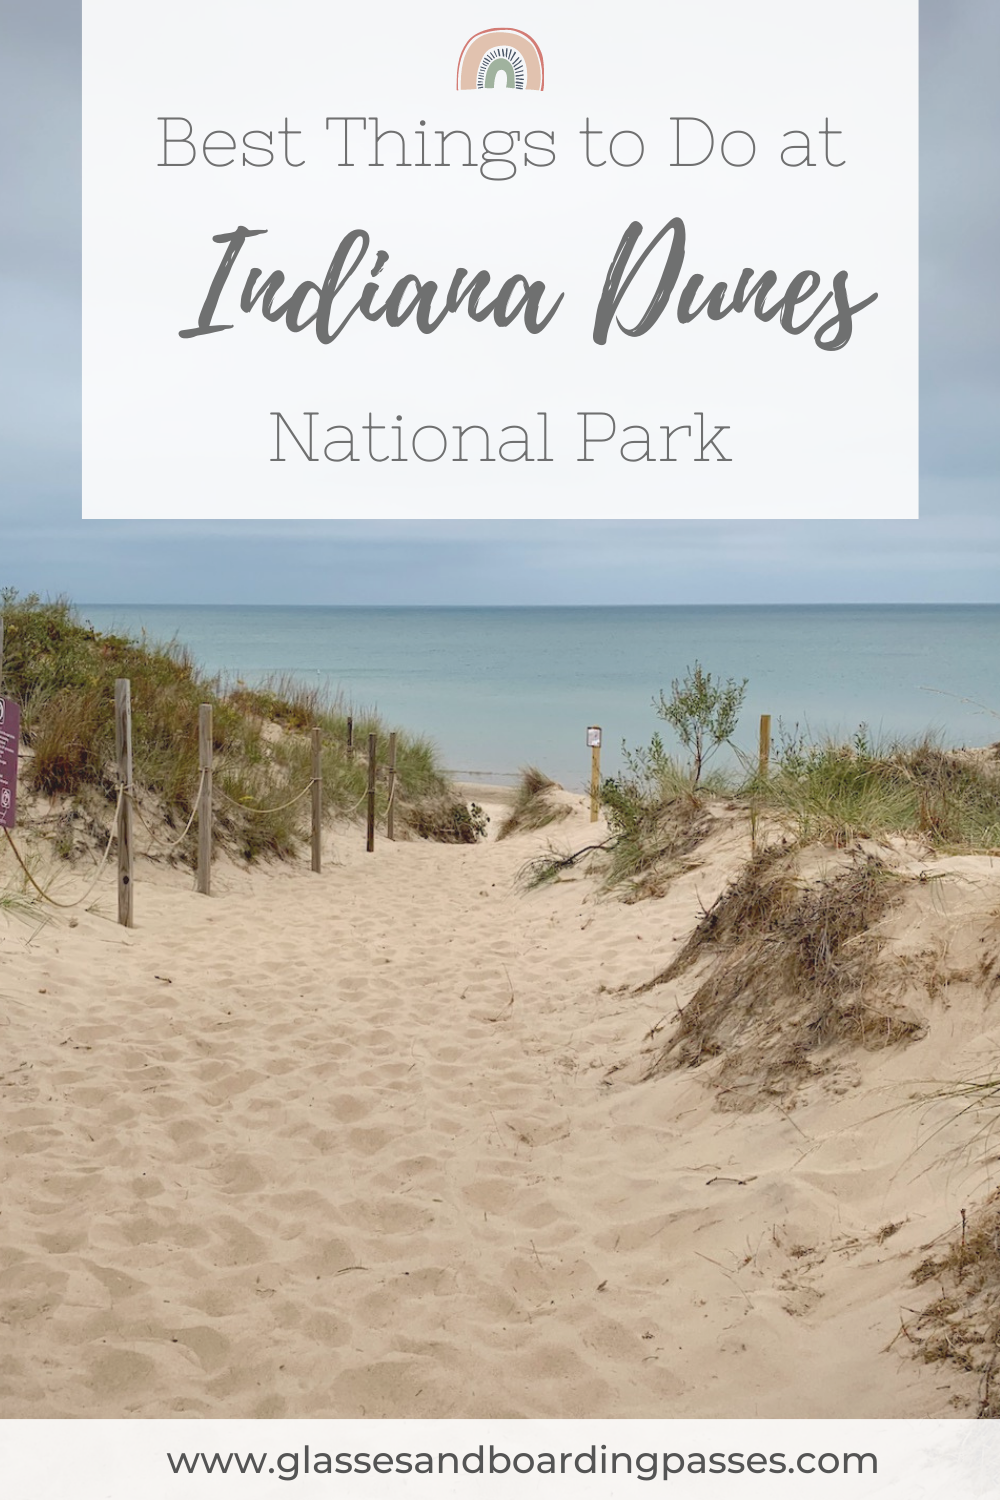 Best Things to Do Indiana Dunes National Park